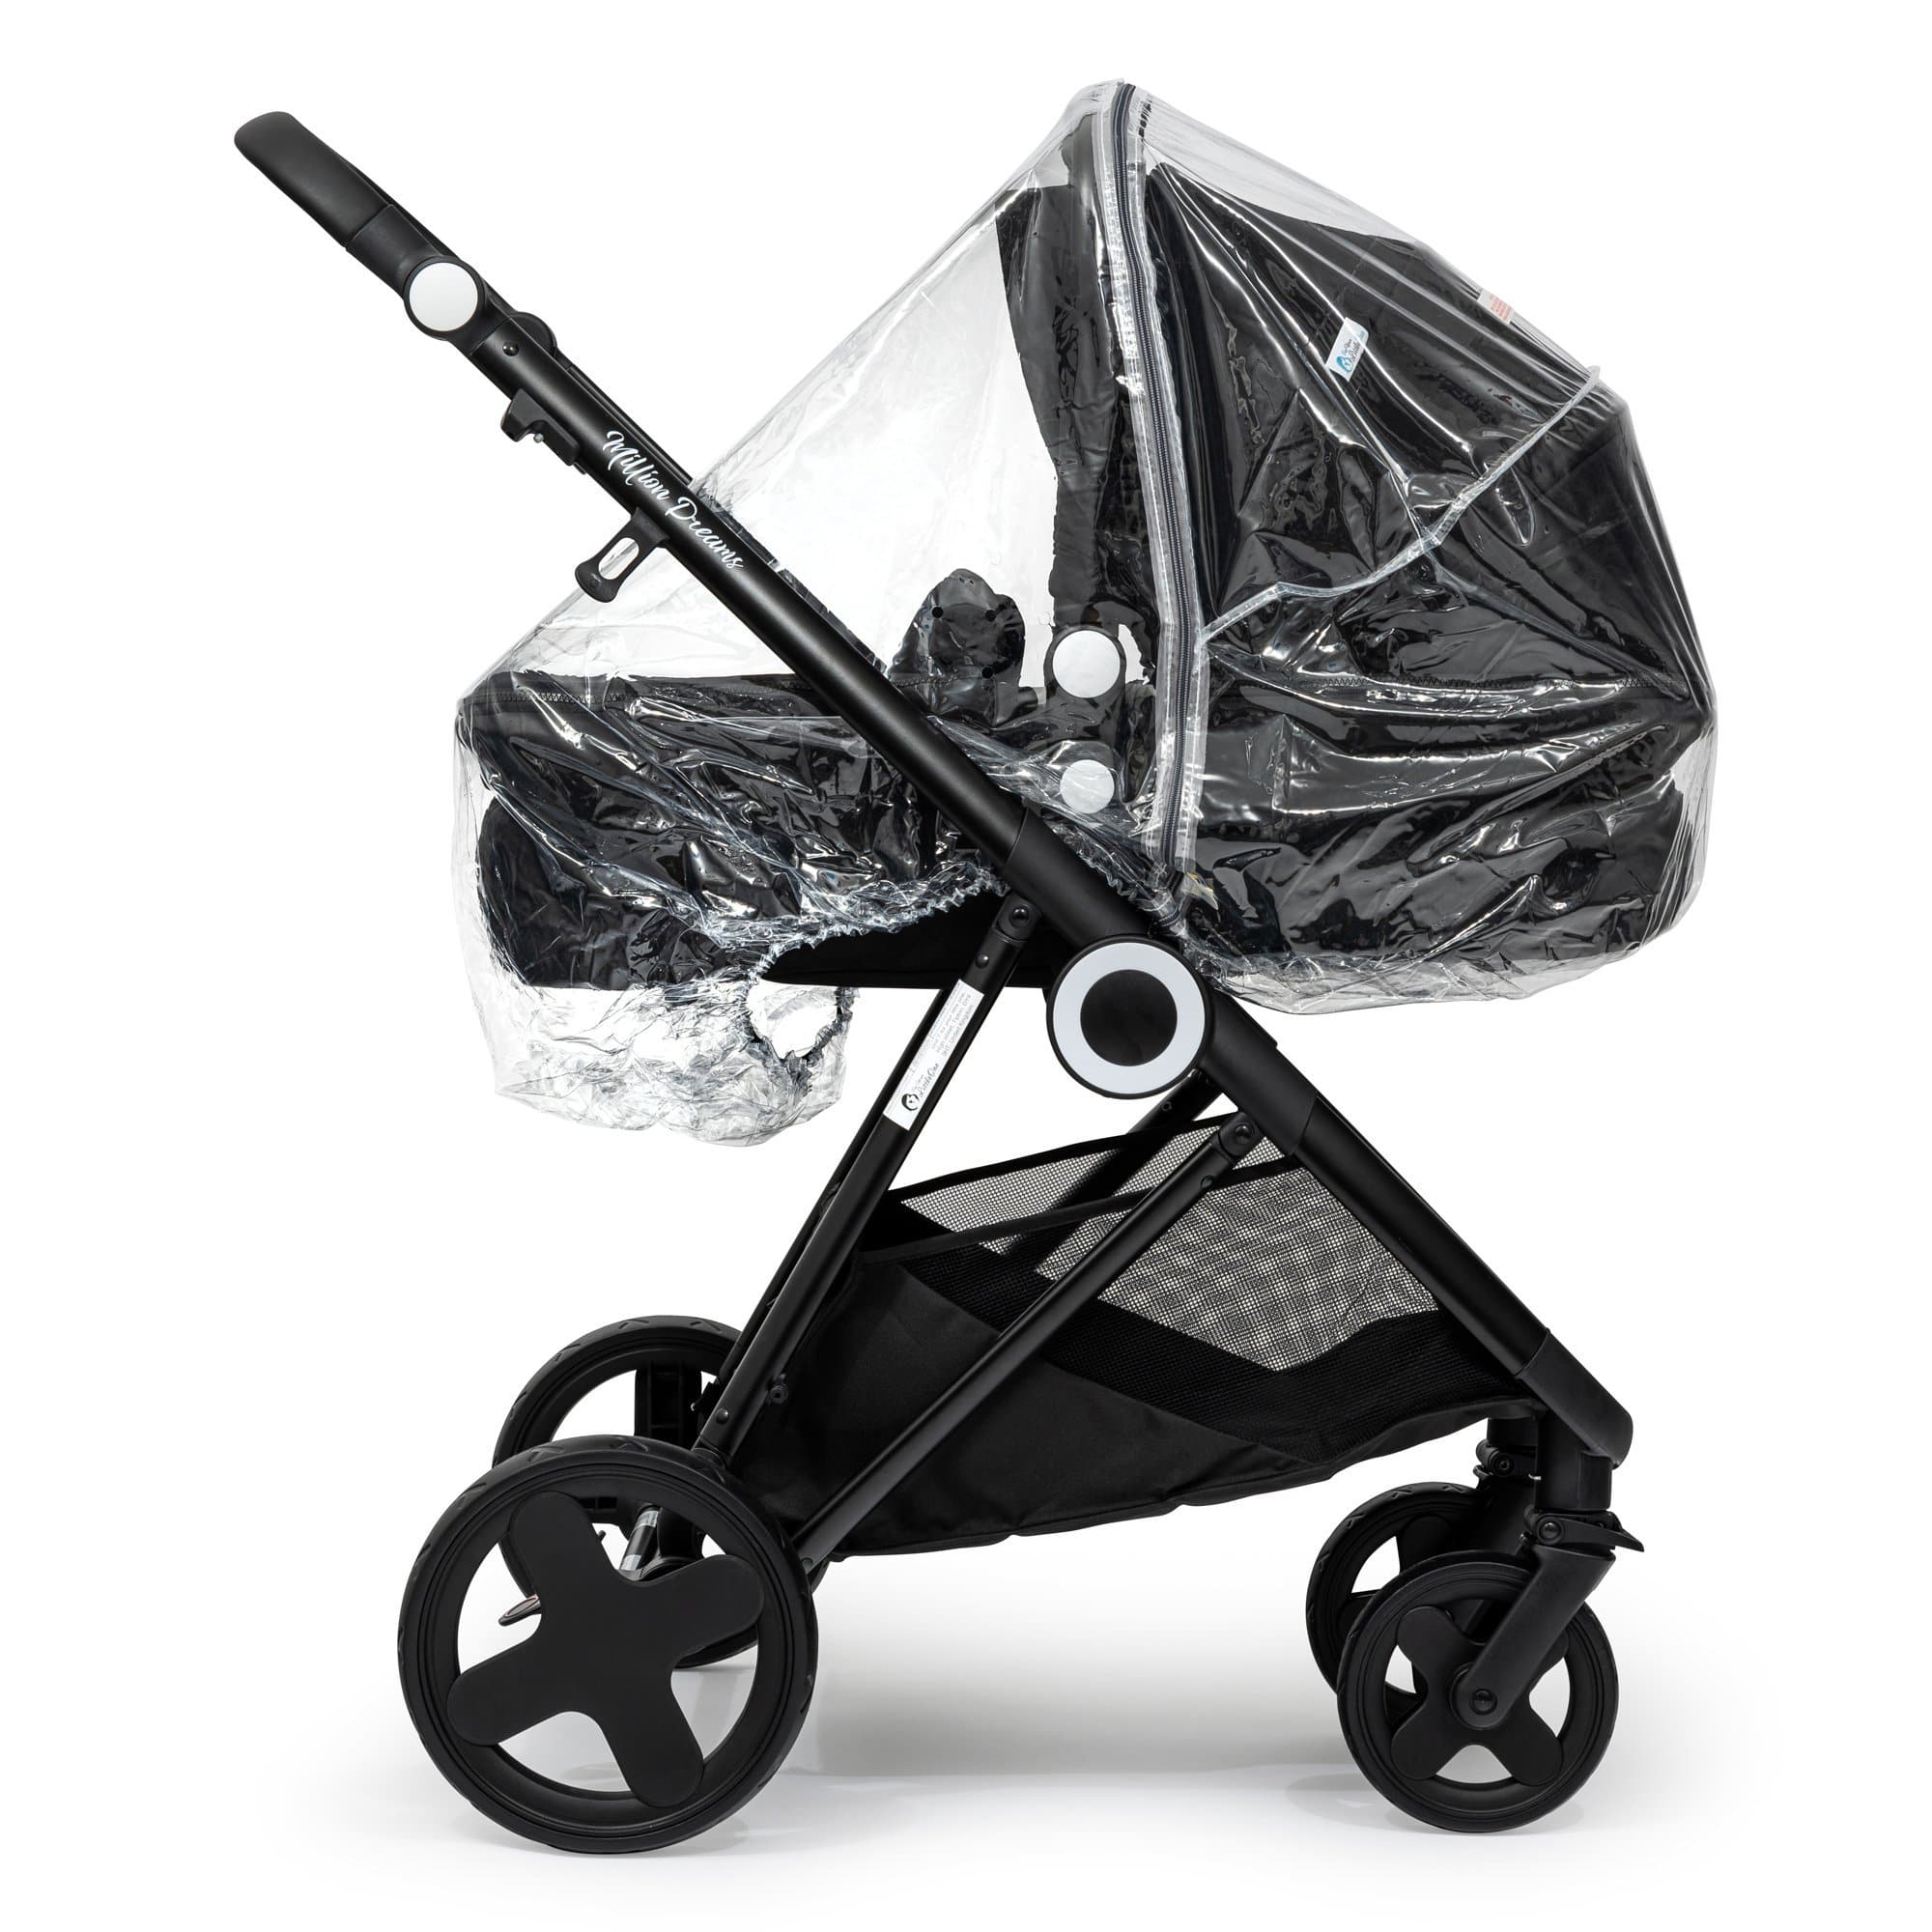 2 in 1 Raincover Compatible with ABC Design - Fits All Models -  | For Your Little One